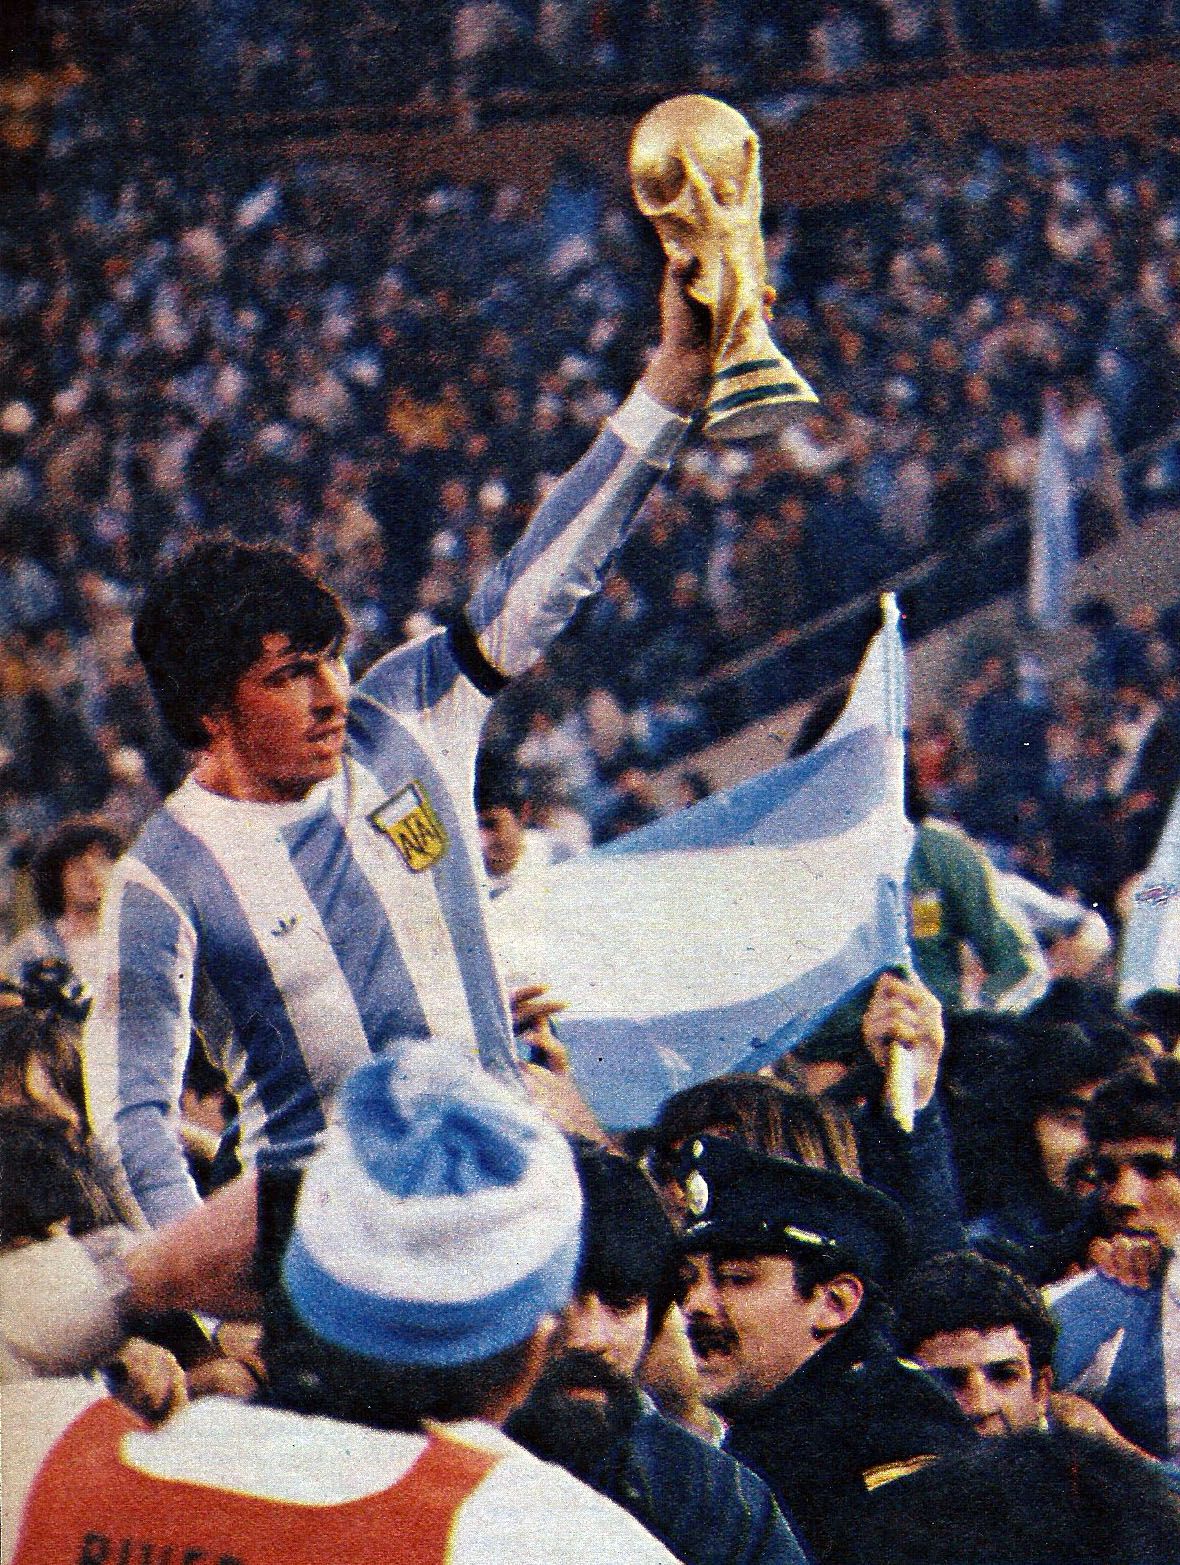 Road to FIFA World Cup Argentina 1978